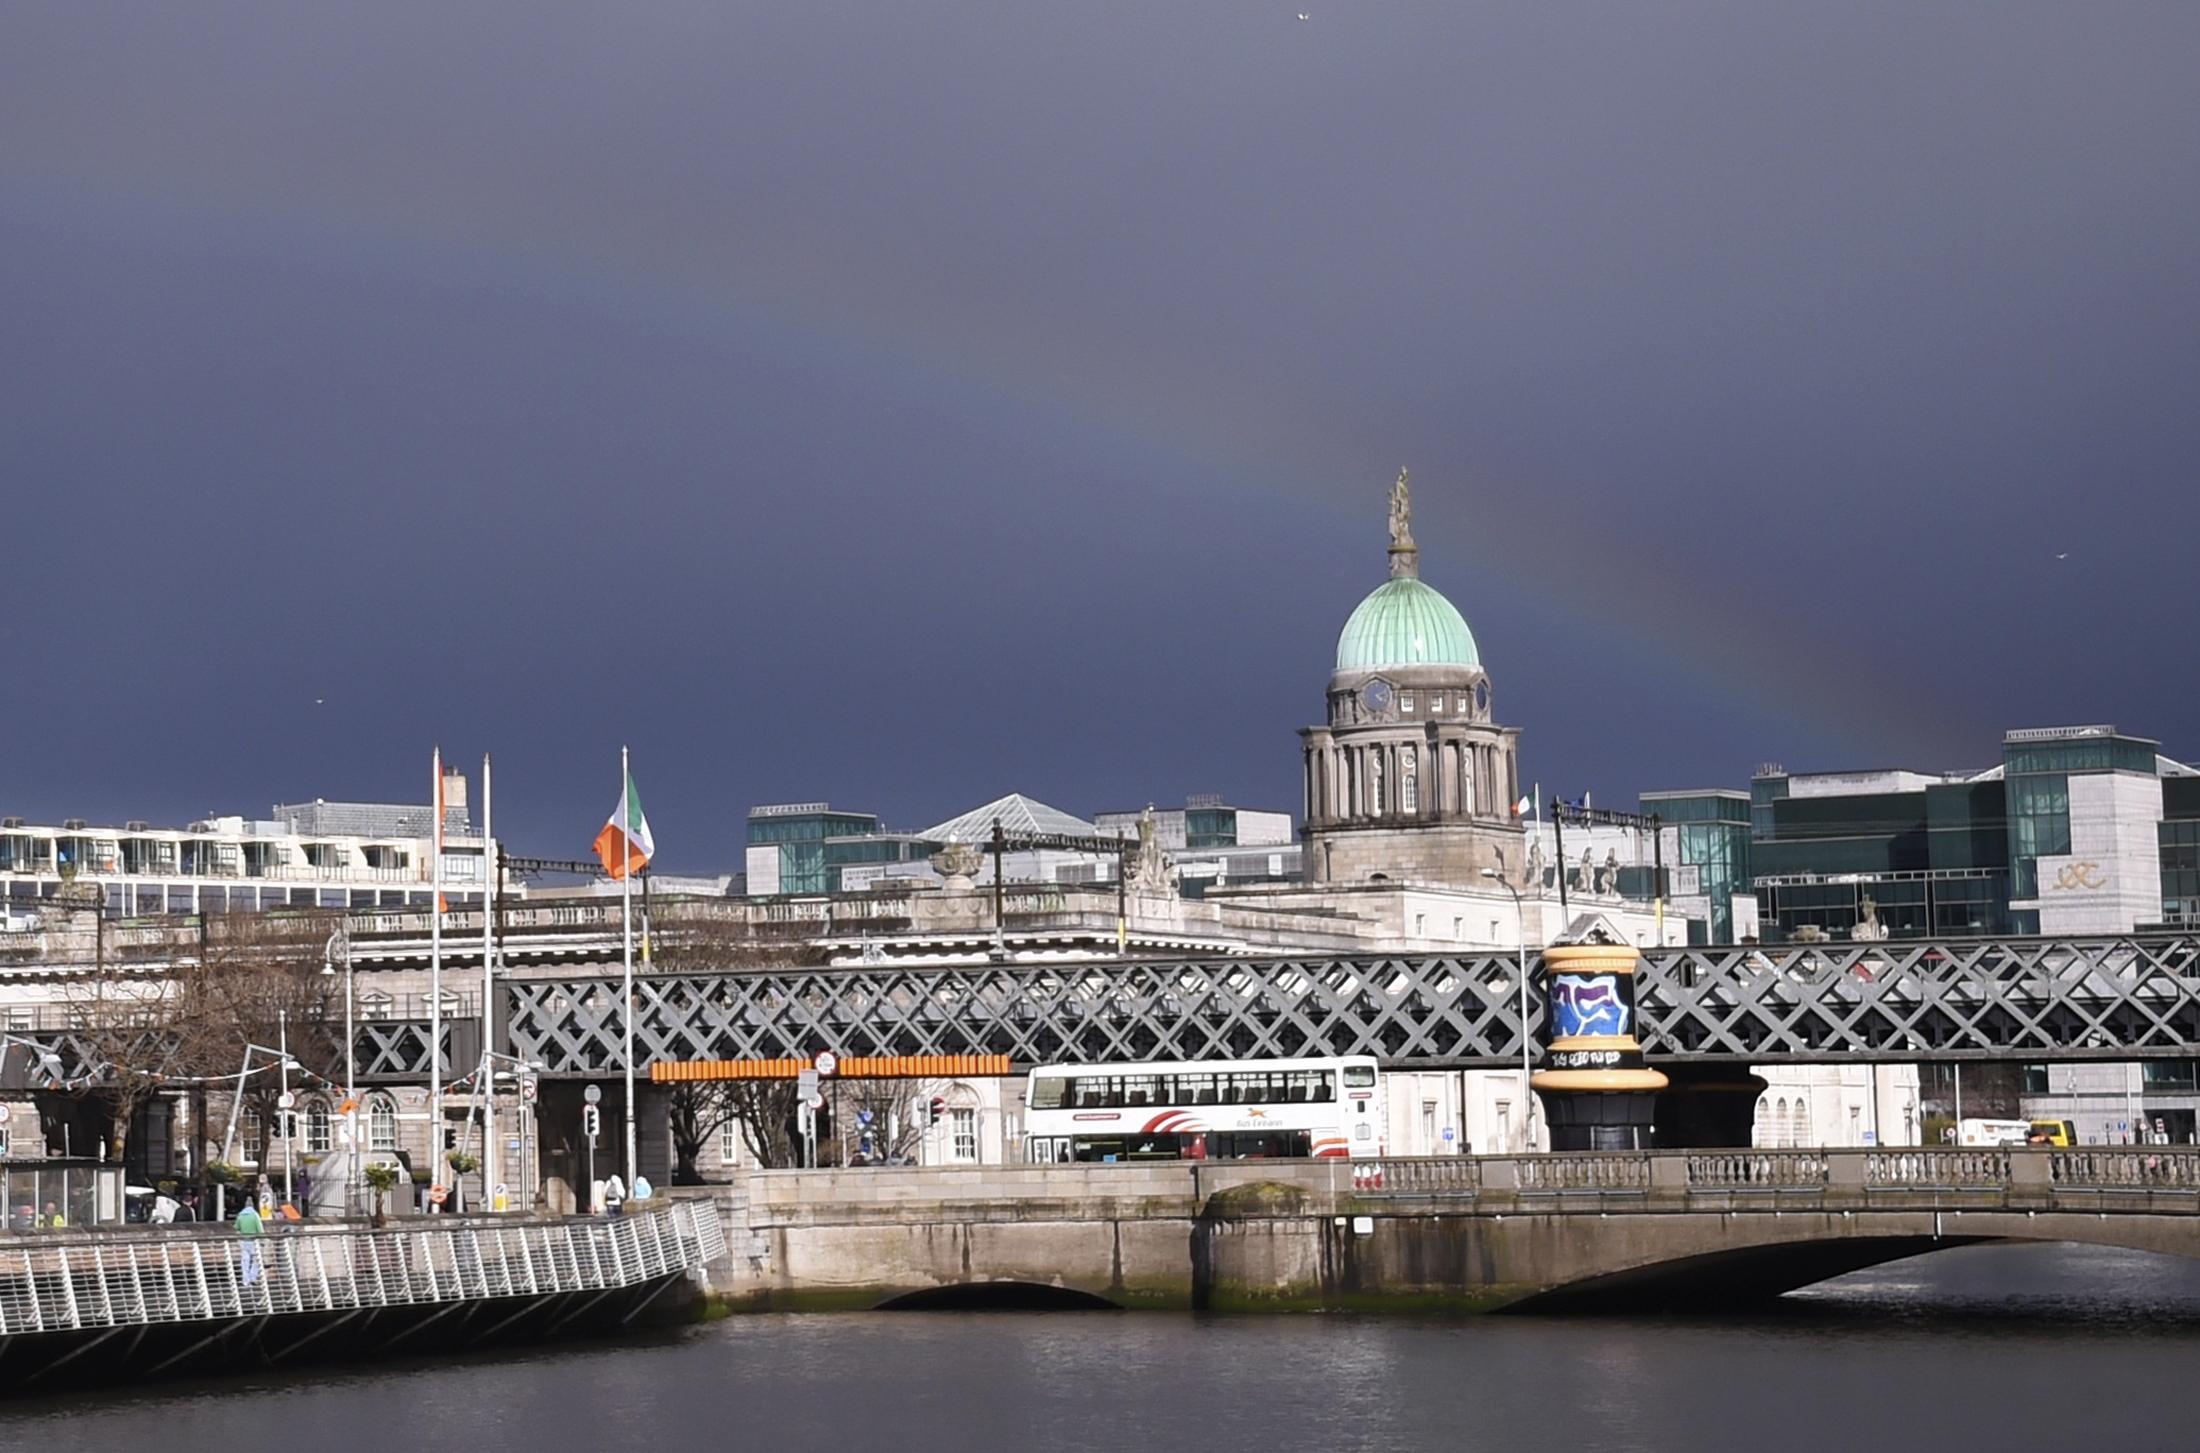 Dublin, Ireland - the country is facing a tough landing due to its economy's reliance on trade with the UK